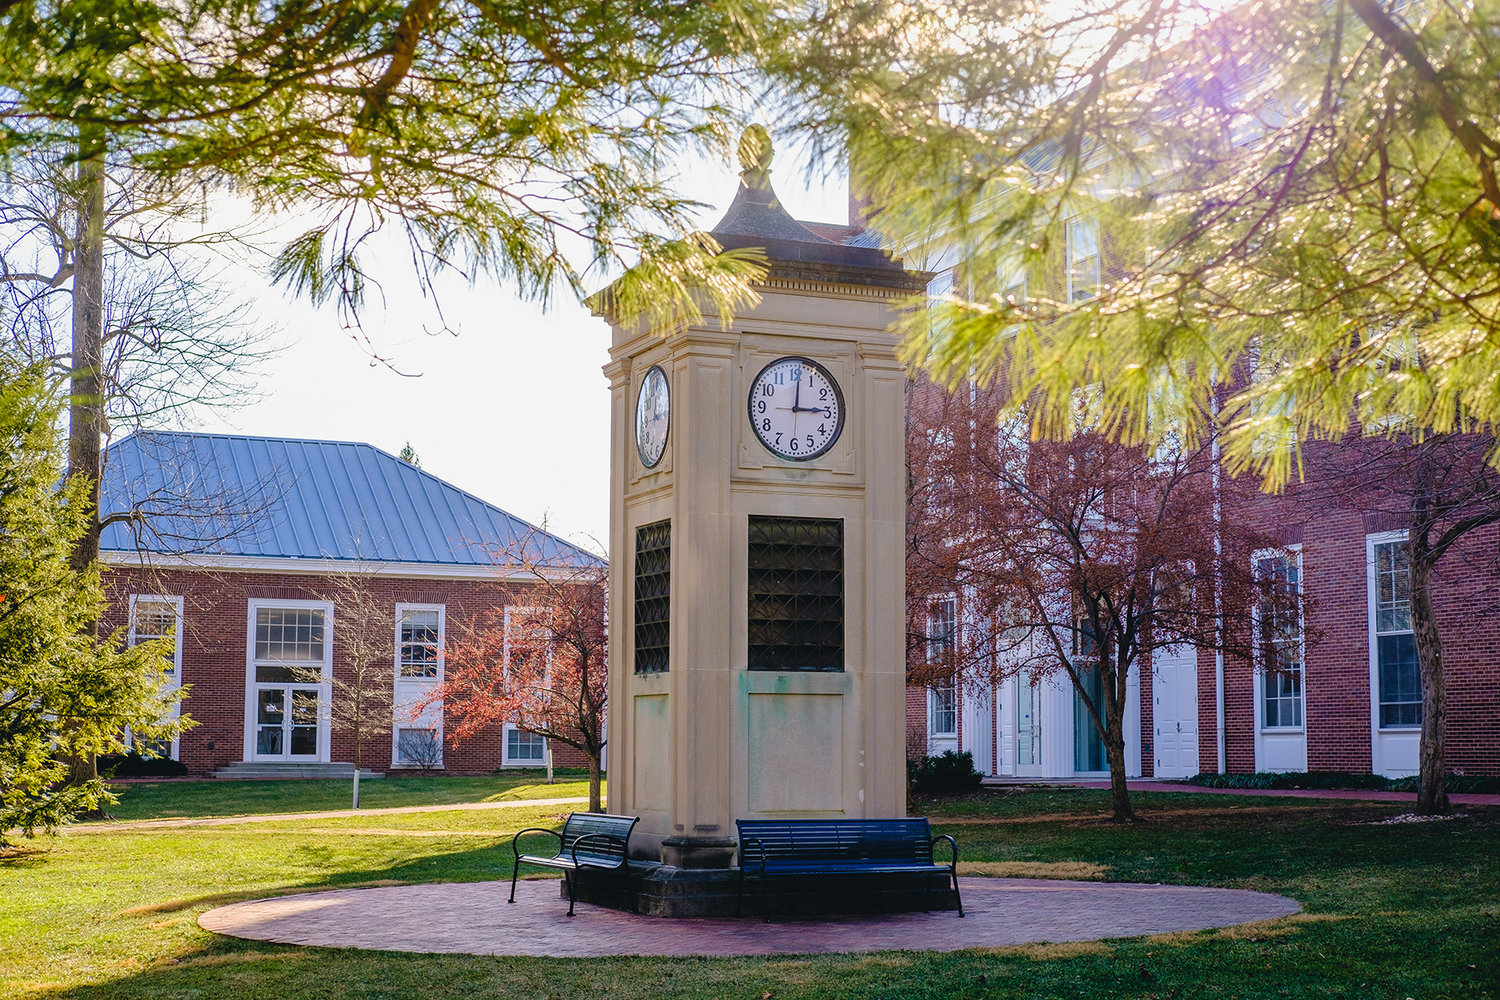 The Milligan Clock sits near the heart of the Wabash College campus in Crawfordsville. The liberal arts college was named one of the best and most interesting colleges and universities in the United States, Canada, Great Britain, and Ireland by the Fiske Guide to Colleges.